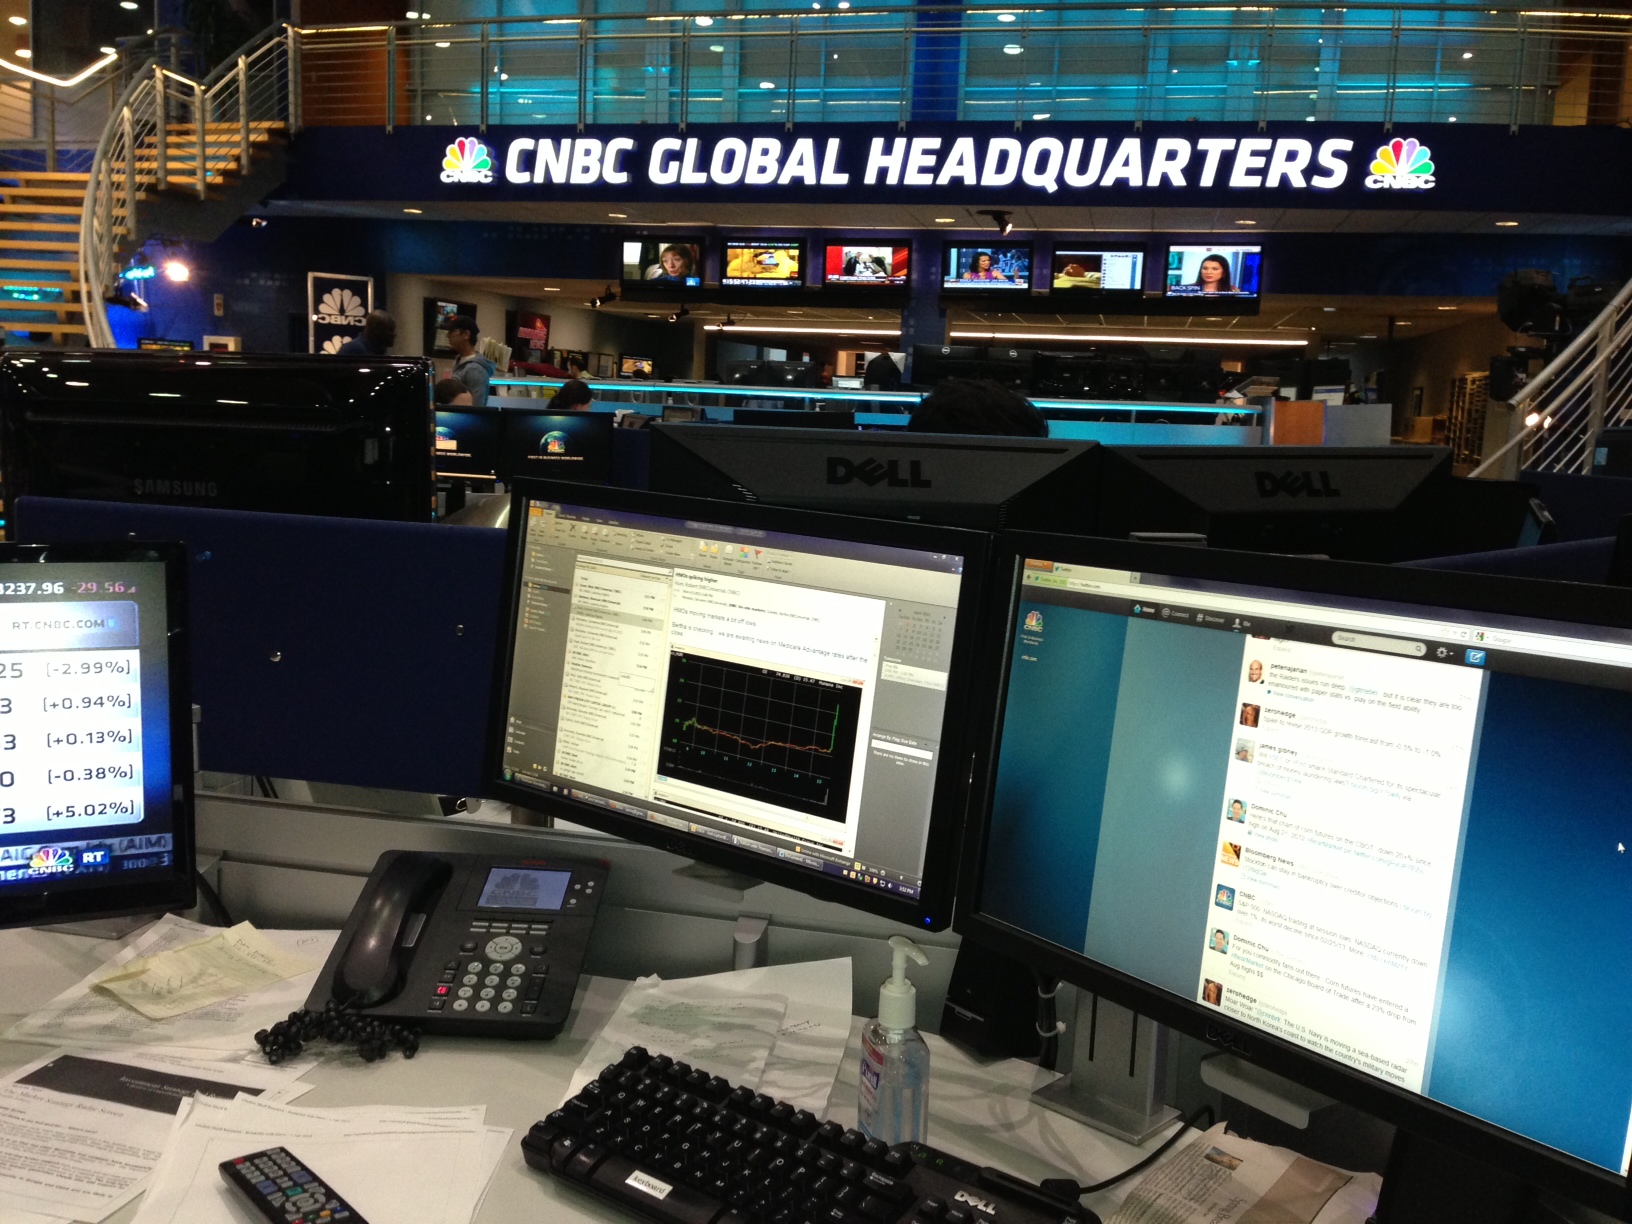 CNBC producer desk with social media tools at the ready.